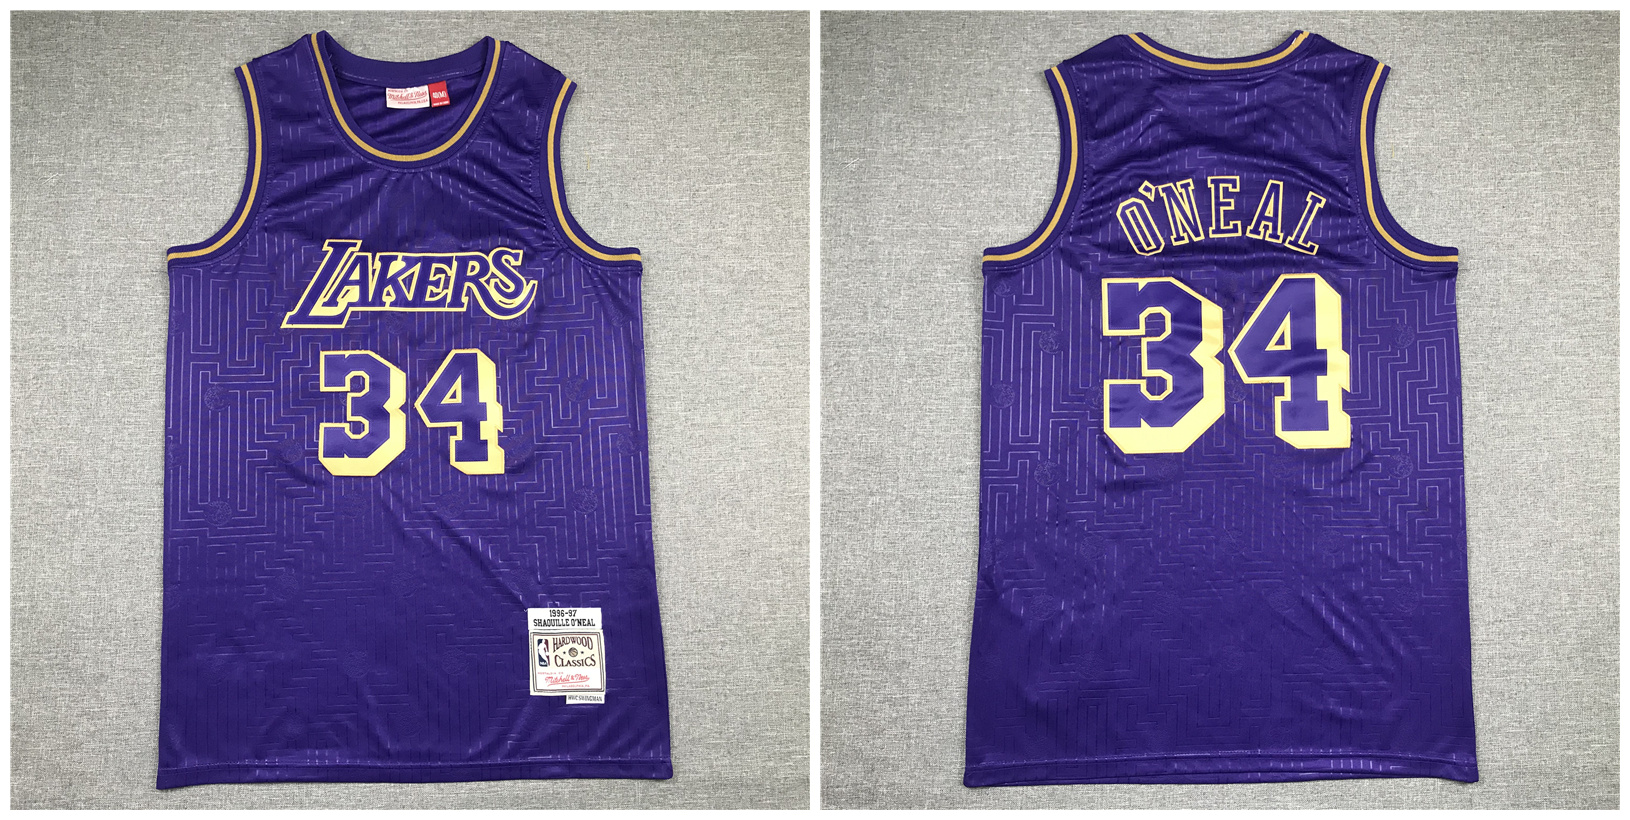 Lakers 34 Shaquille O'Neal Purple 1996-97 Hardwood Classics Jersey